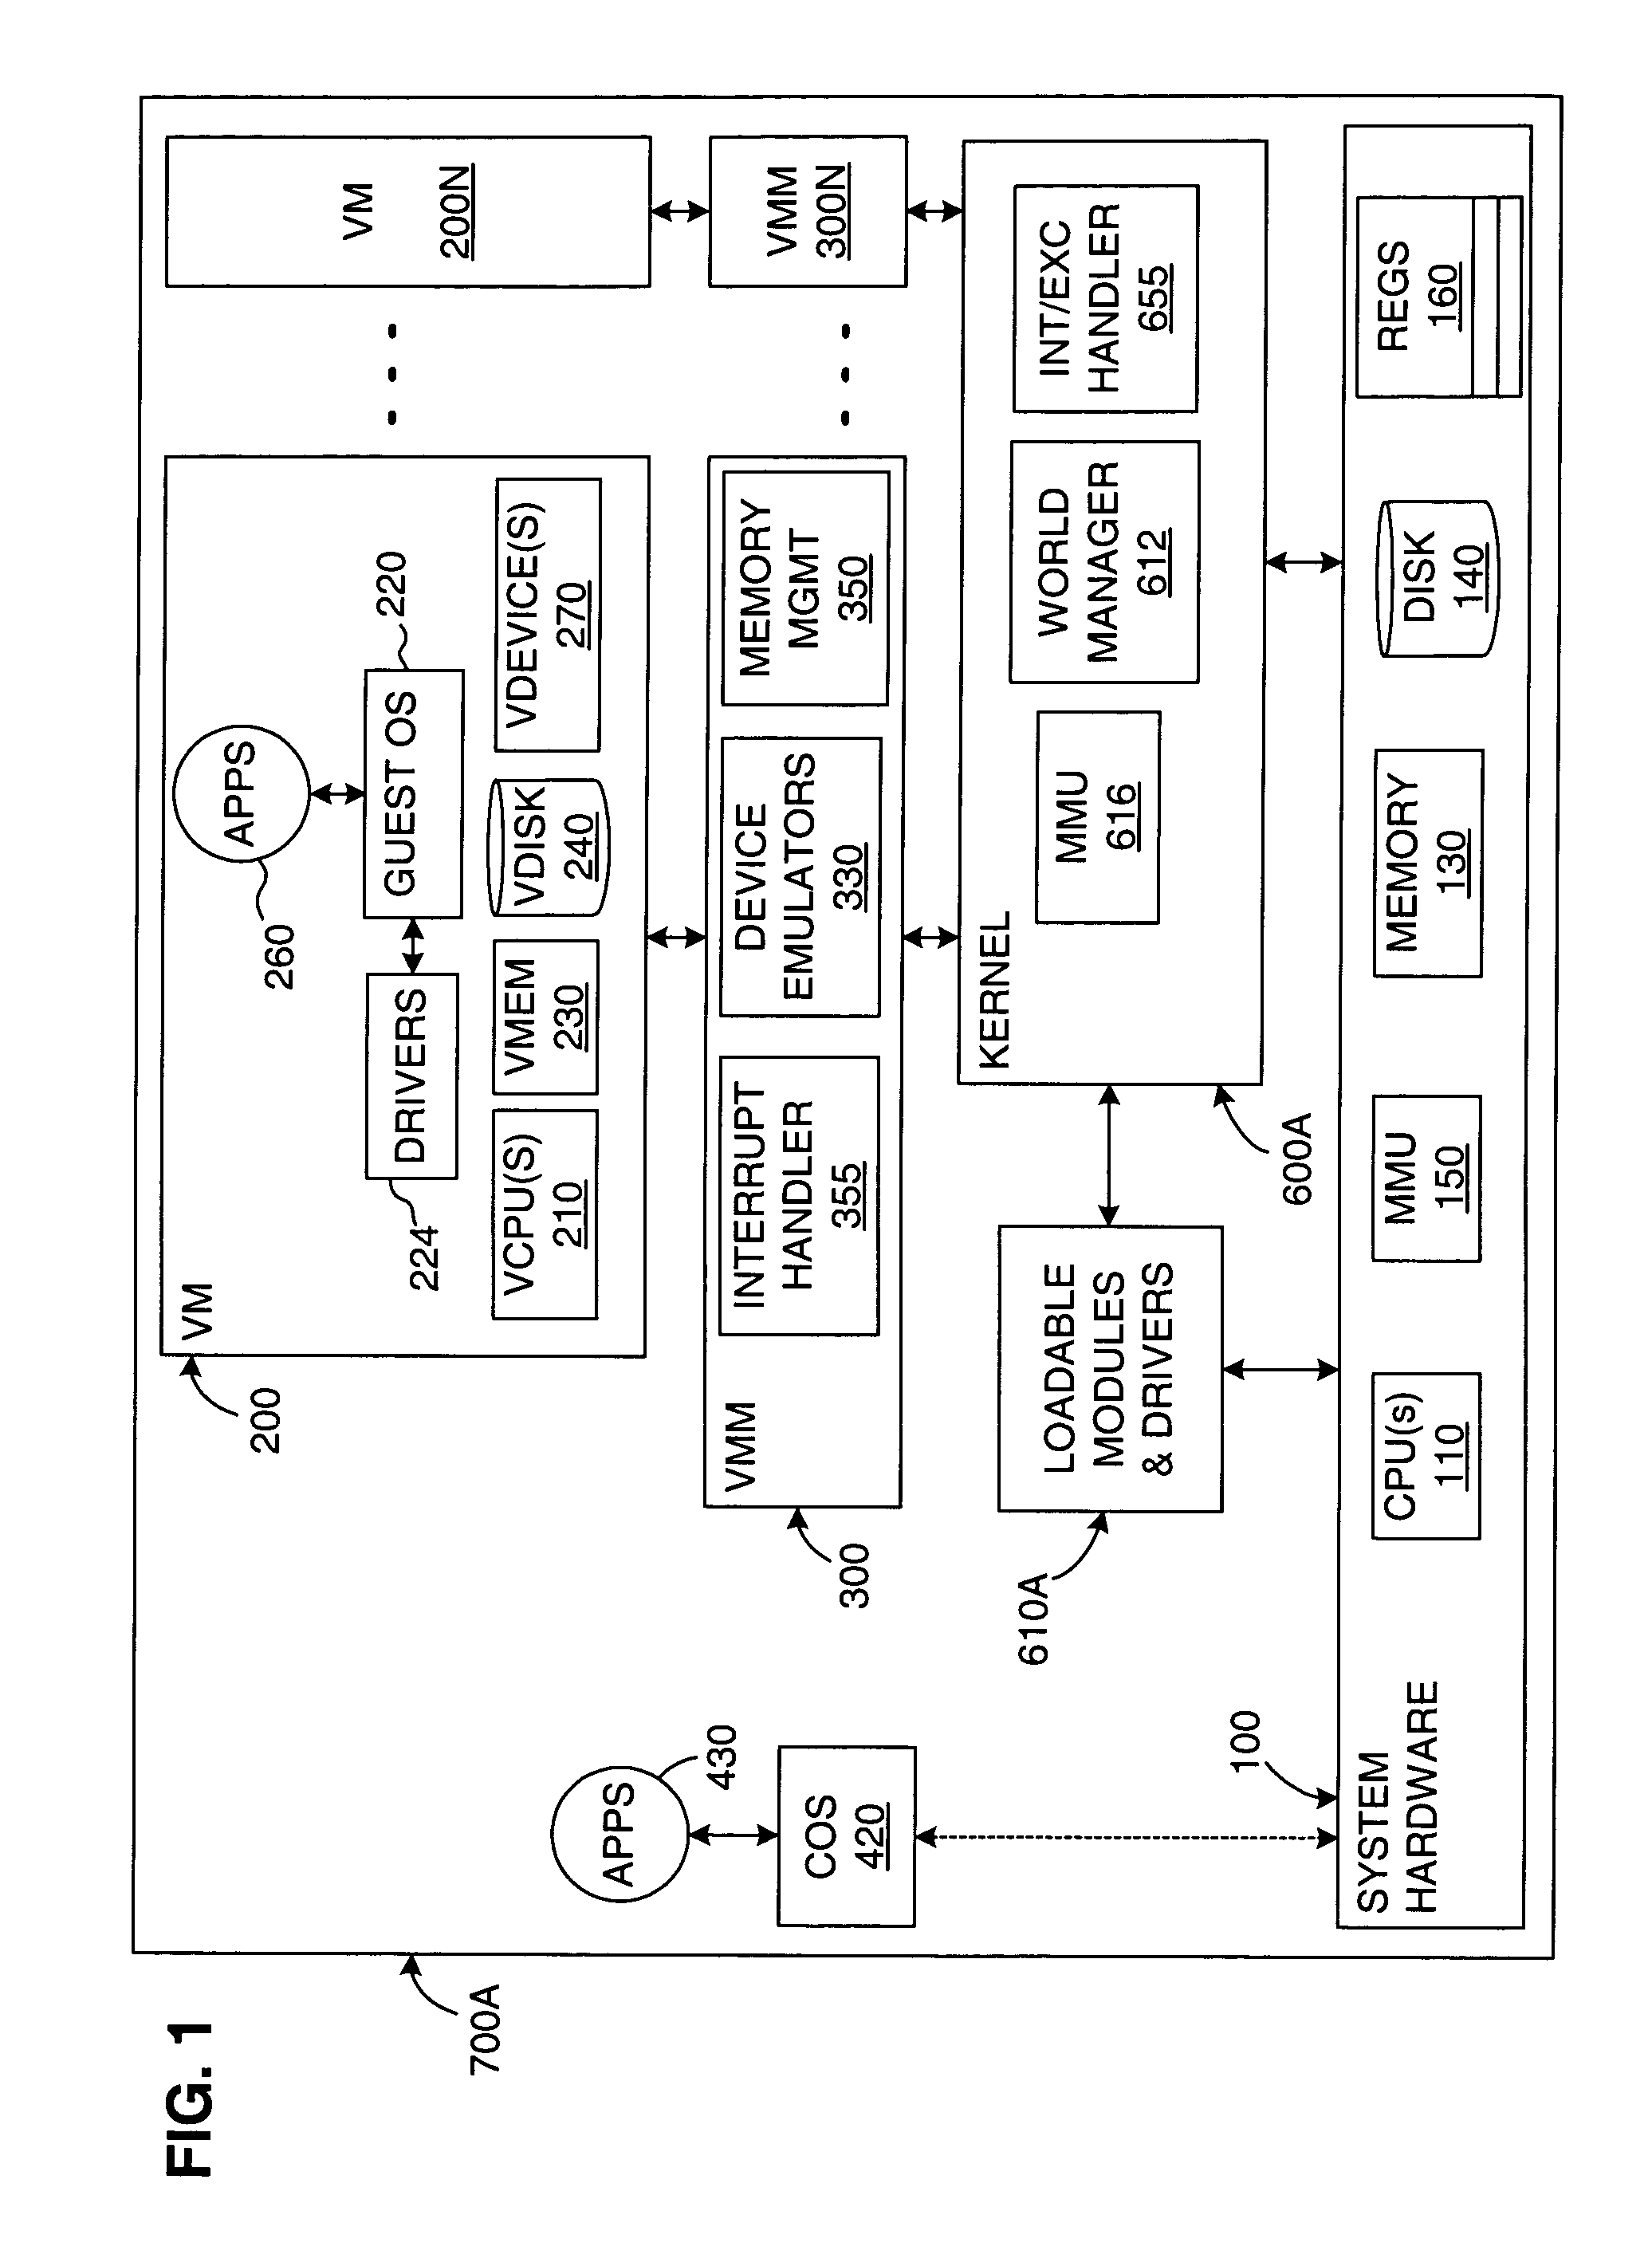 Managing network data transfers in a virtual computer system